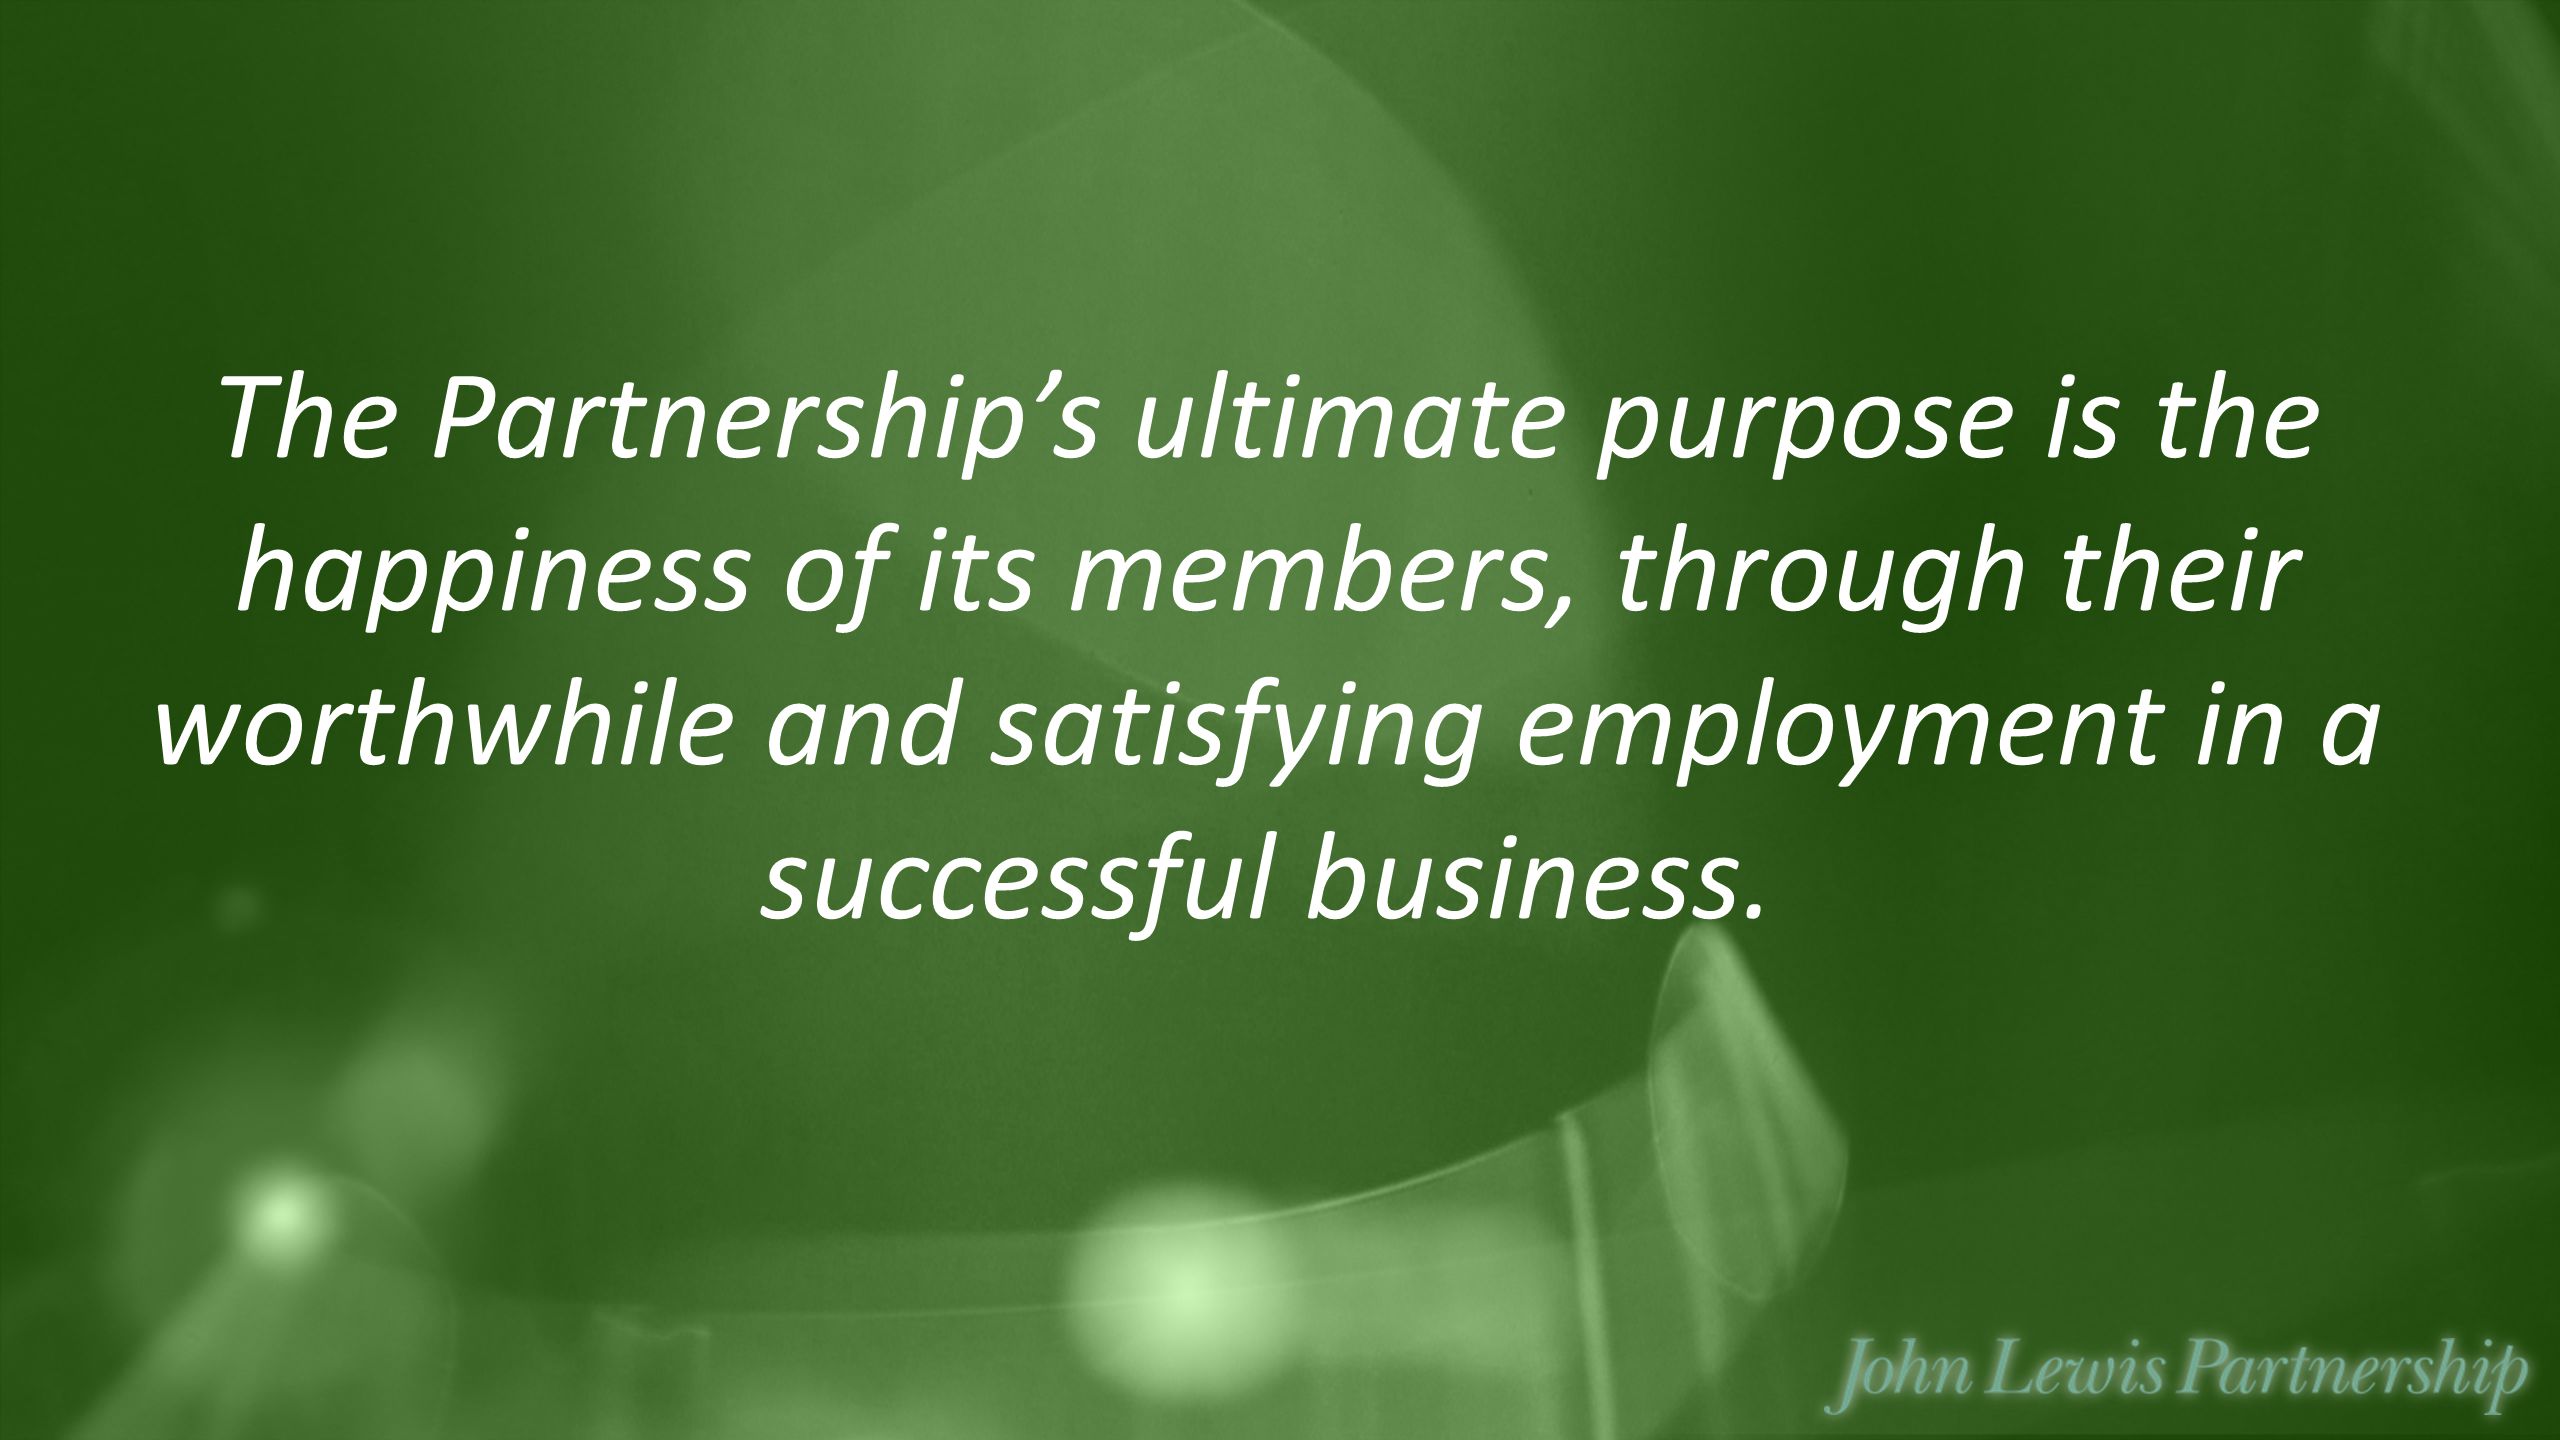 The Partnership’s ultimate purpose is the happiness of its members, through their worthwhile and satisfying employment in a successful business.